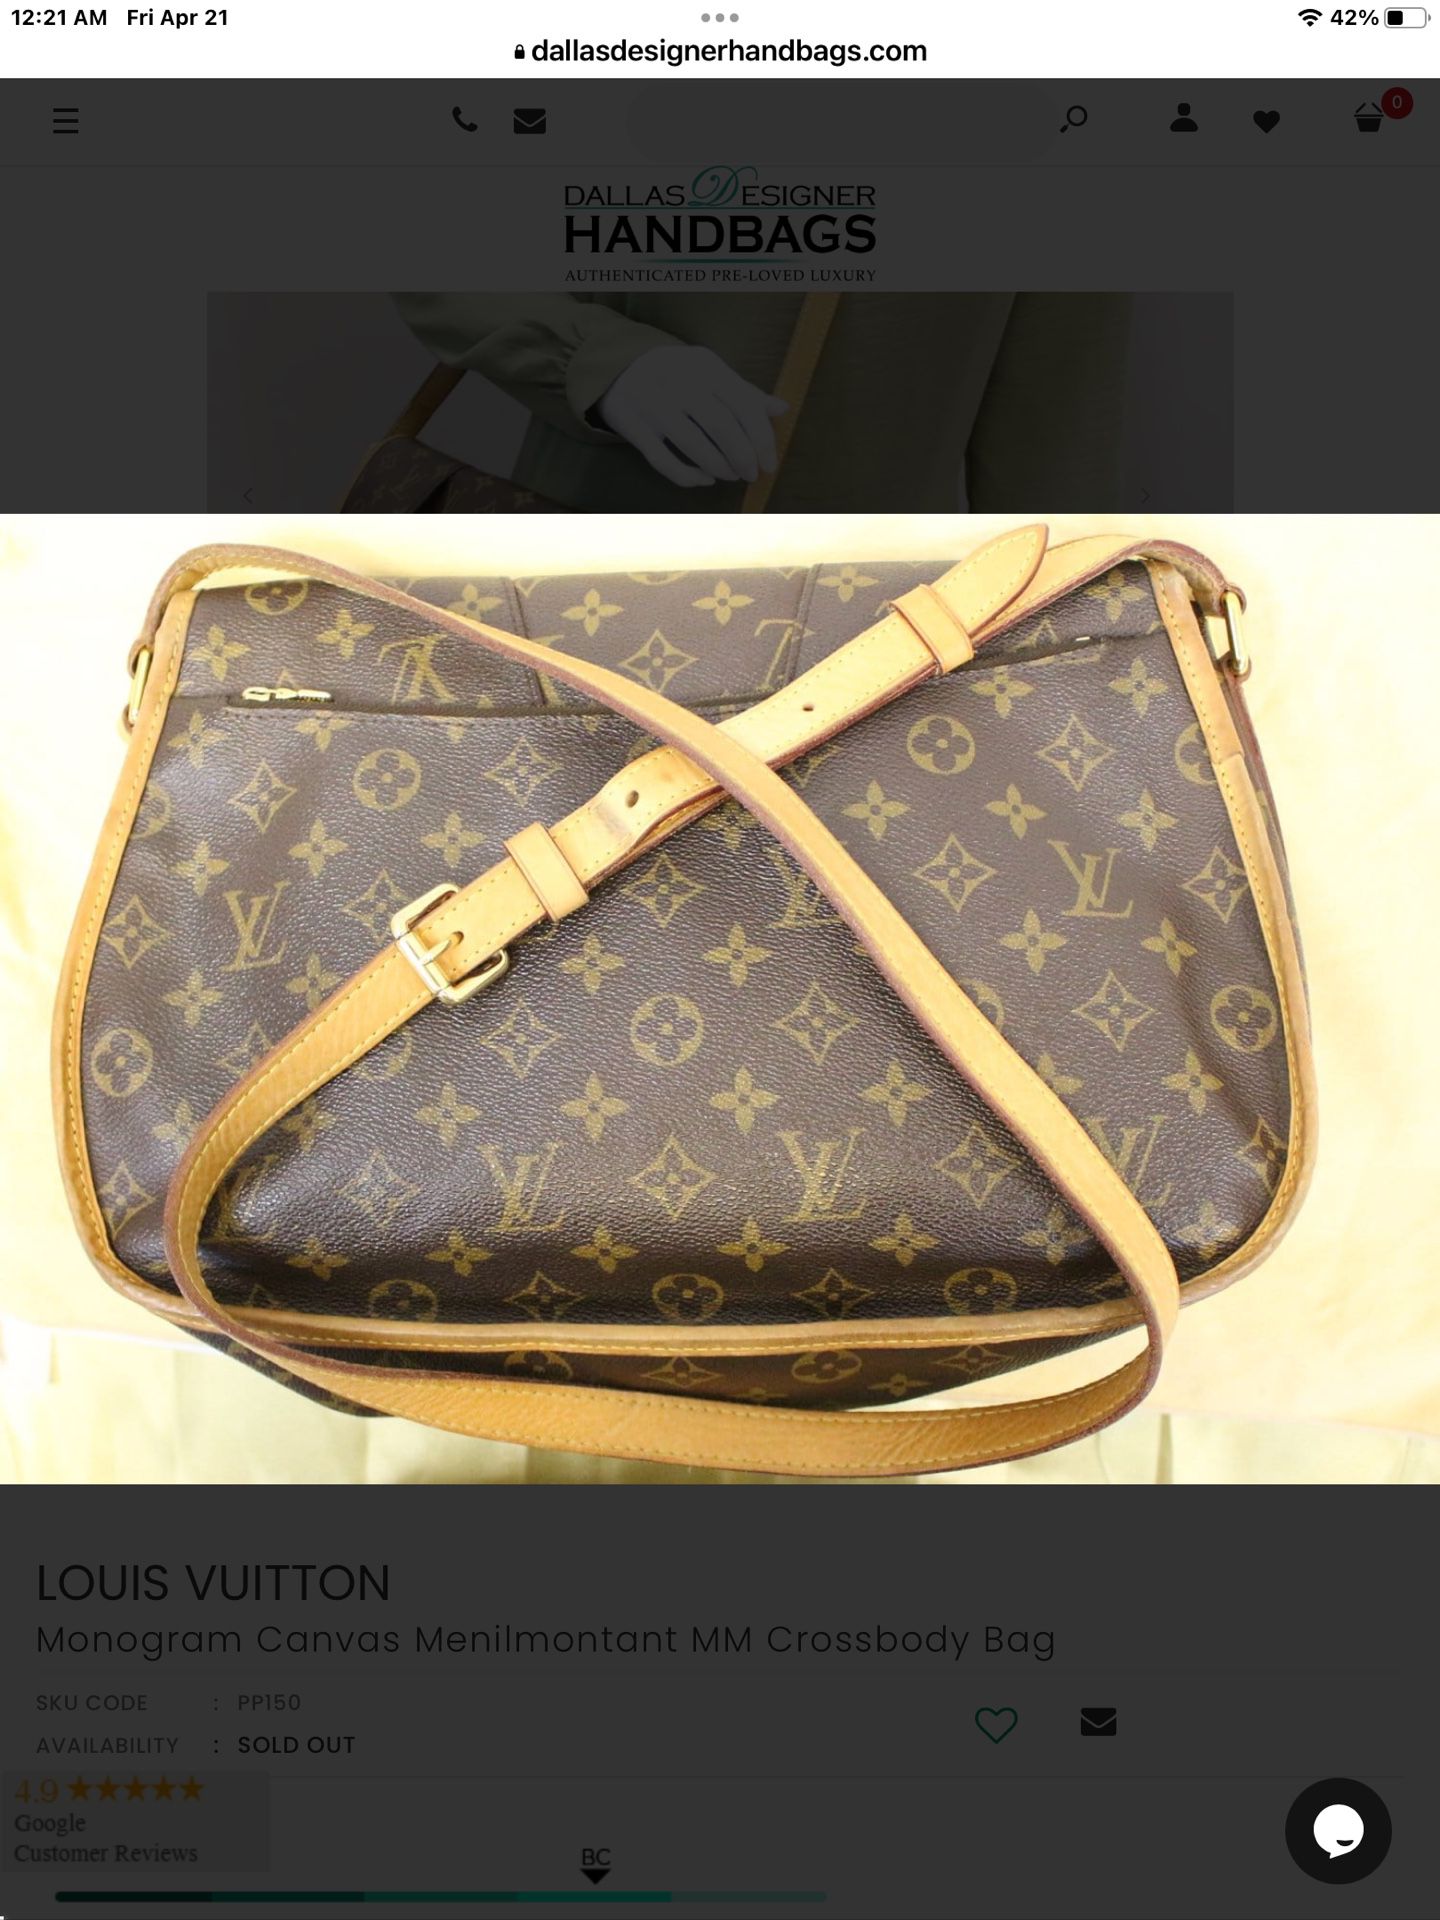 Beautiful LV Bag, Gm Size,hard To Find!Mentiliment For Sale Or